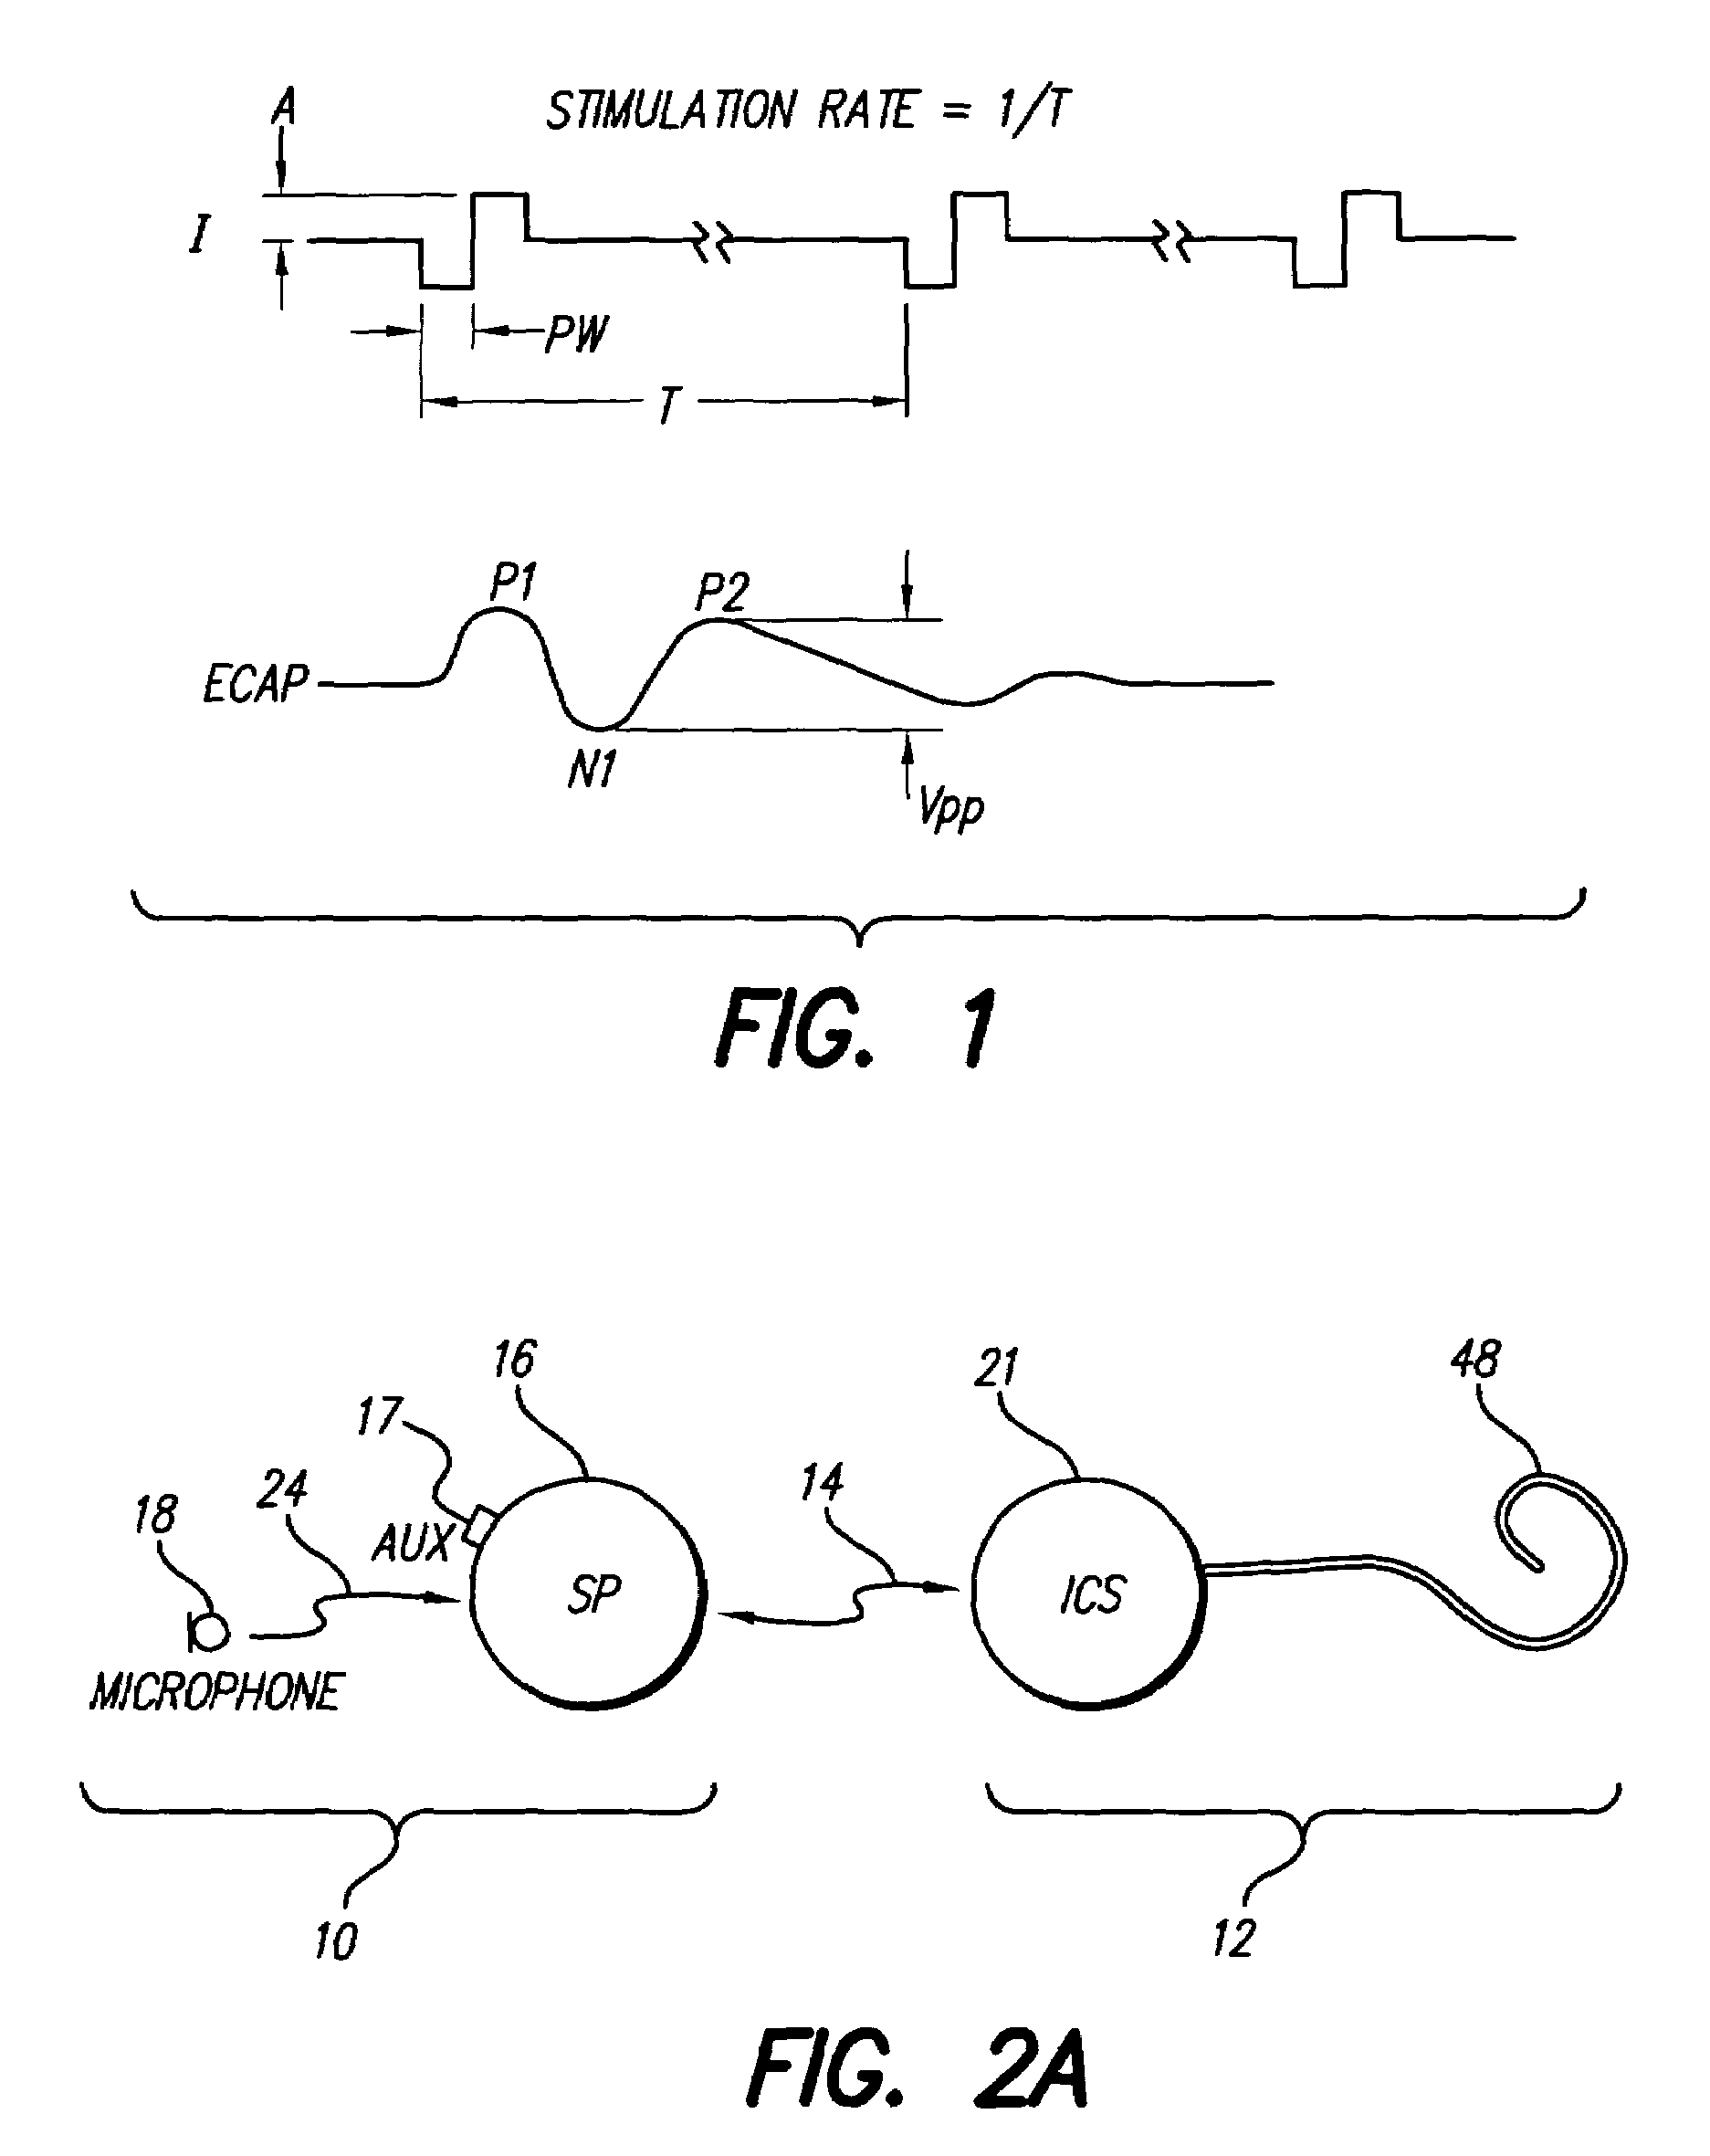 Method and system for generating a cochlear implant program using multi-electrode stimulation to elicit the electrically-evoked compound action potential